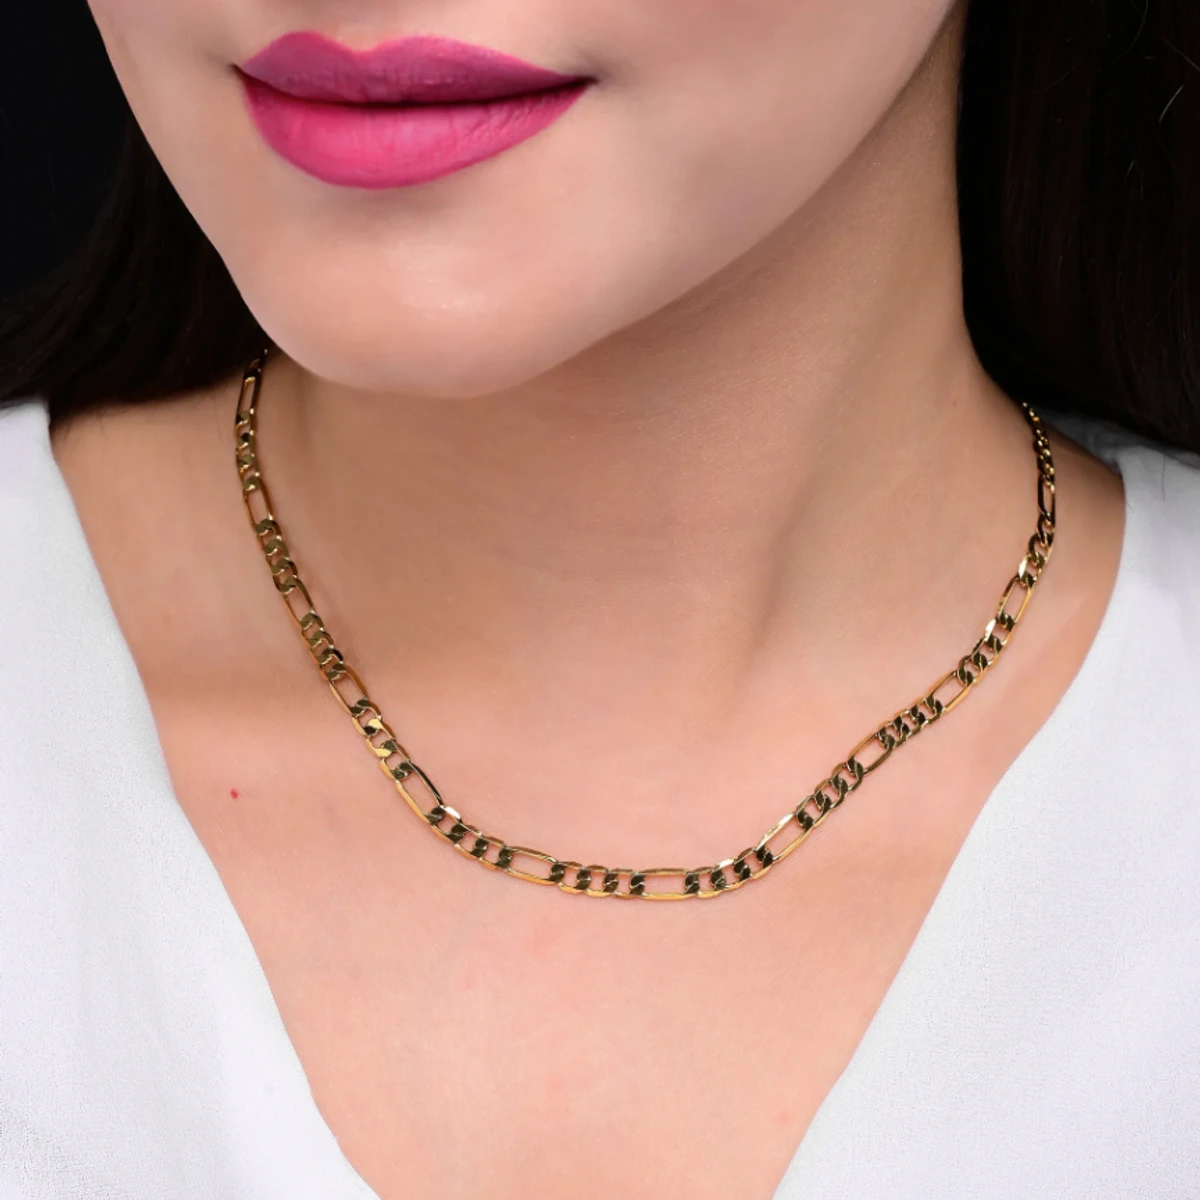 Jewellery Premium Quality Gold Colour Long Chain For Women- Chain For Girls